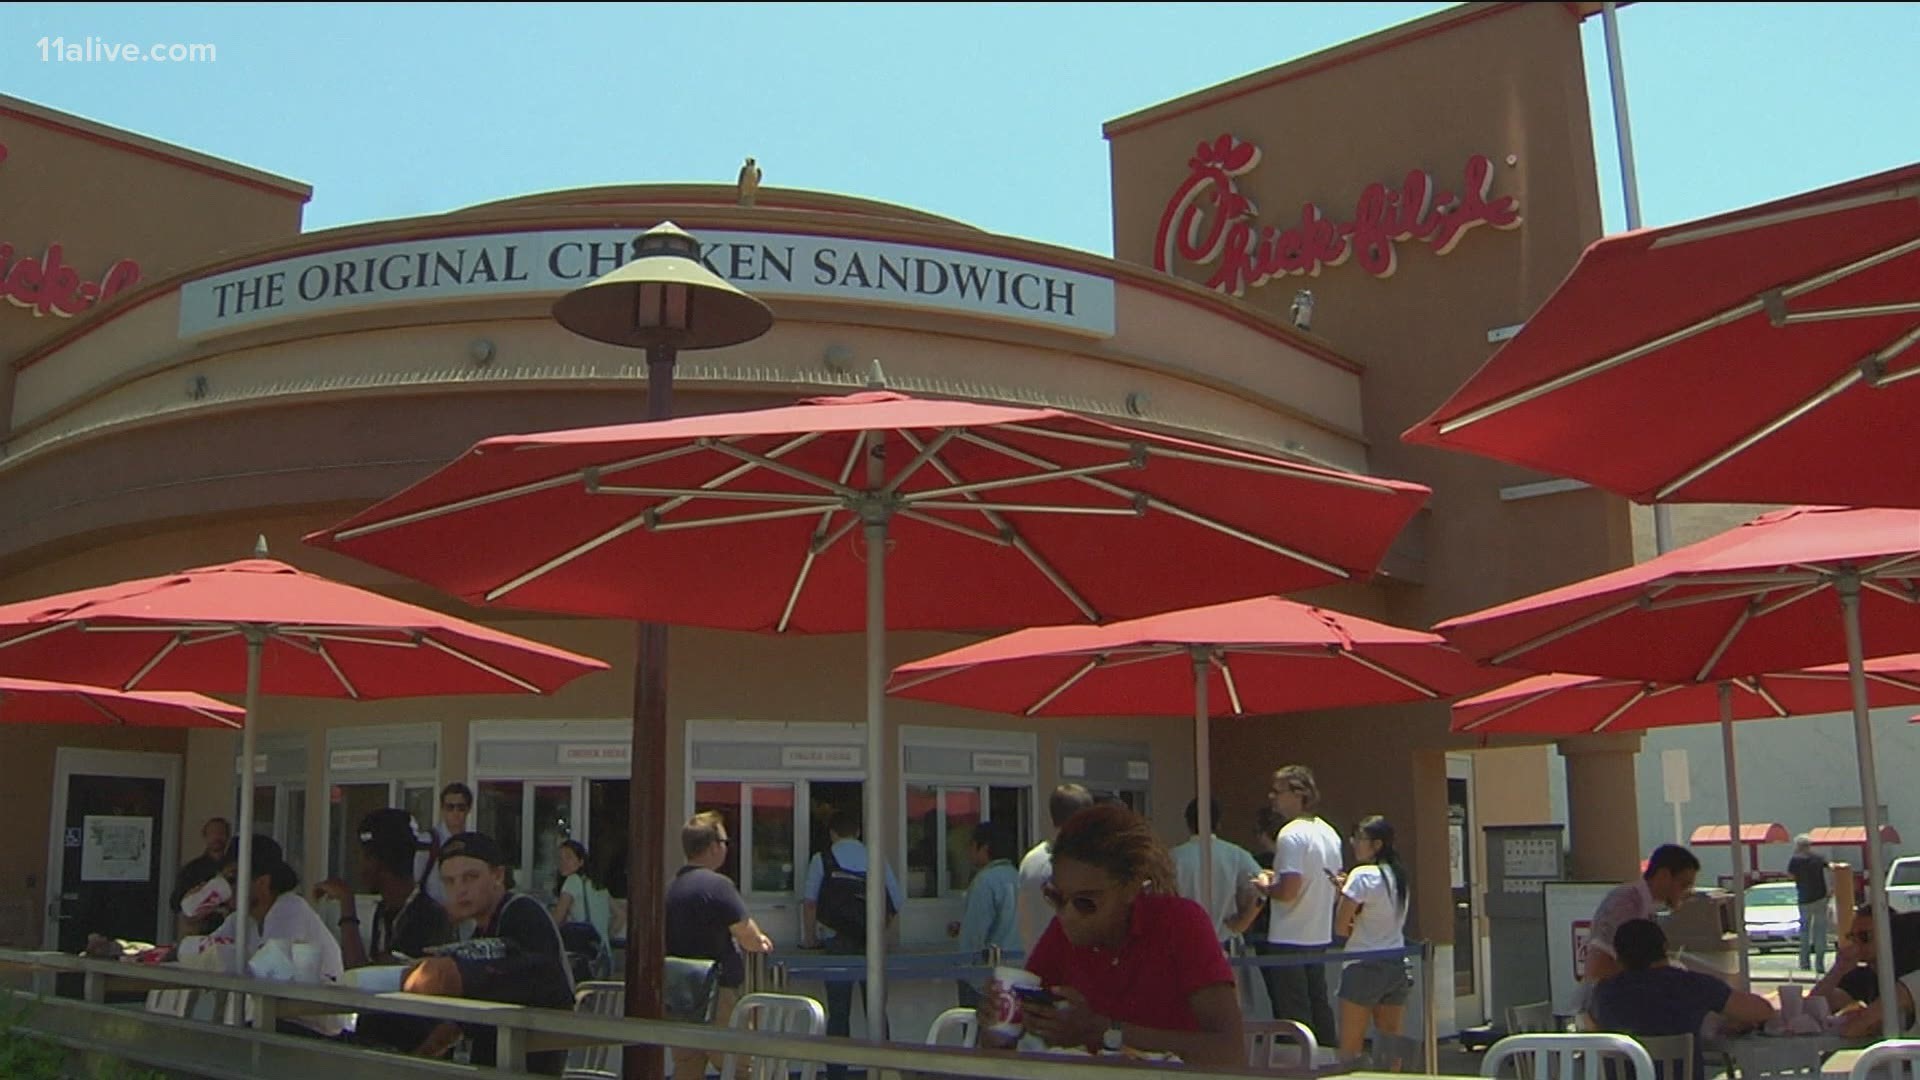 Chick-fil-A has been named the king of fast-food for the seventh year in a row, according to the American Customer Satisfaction Index.